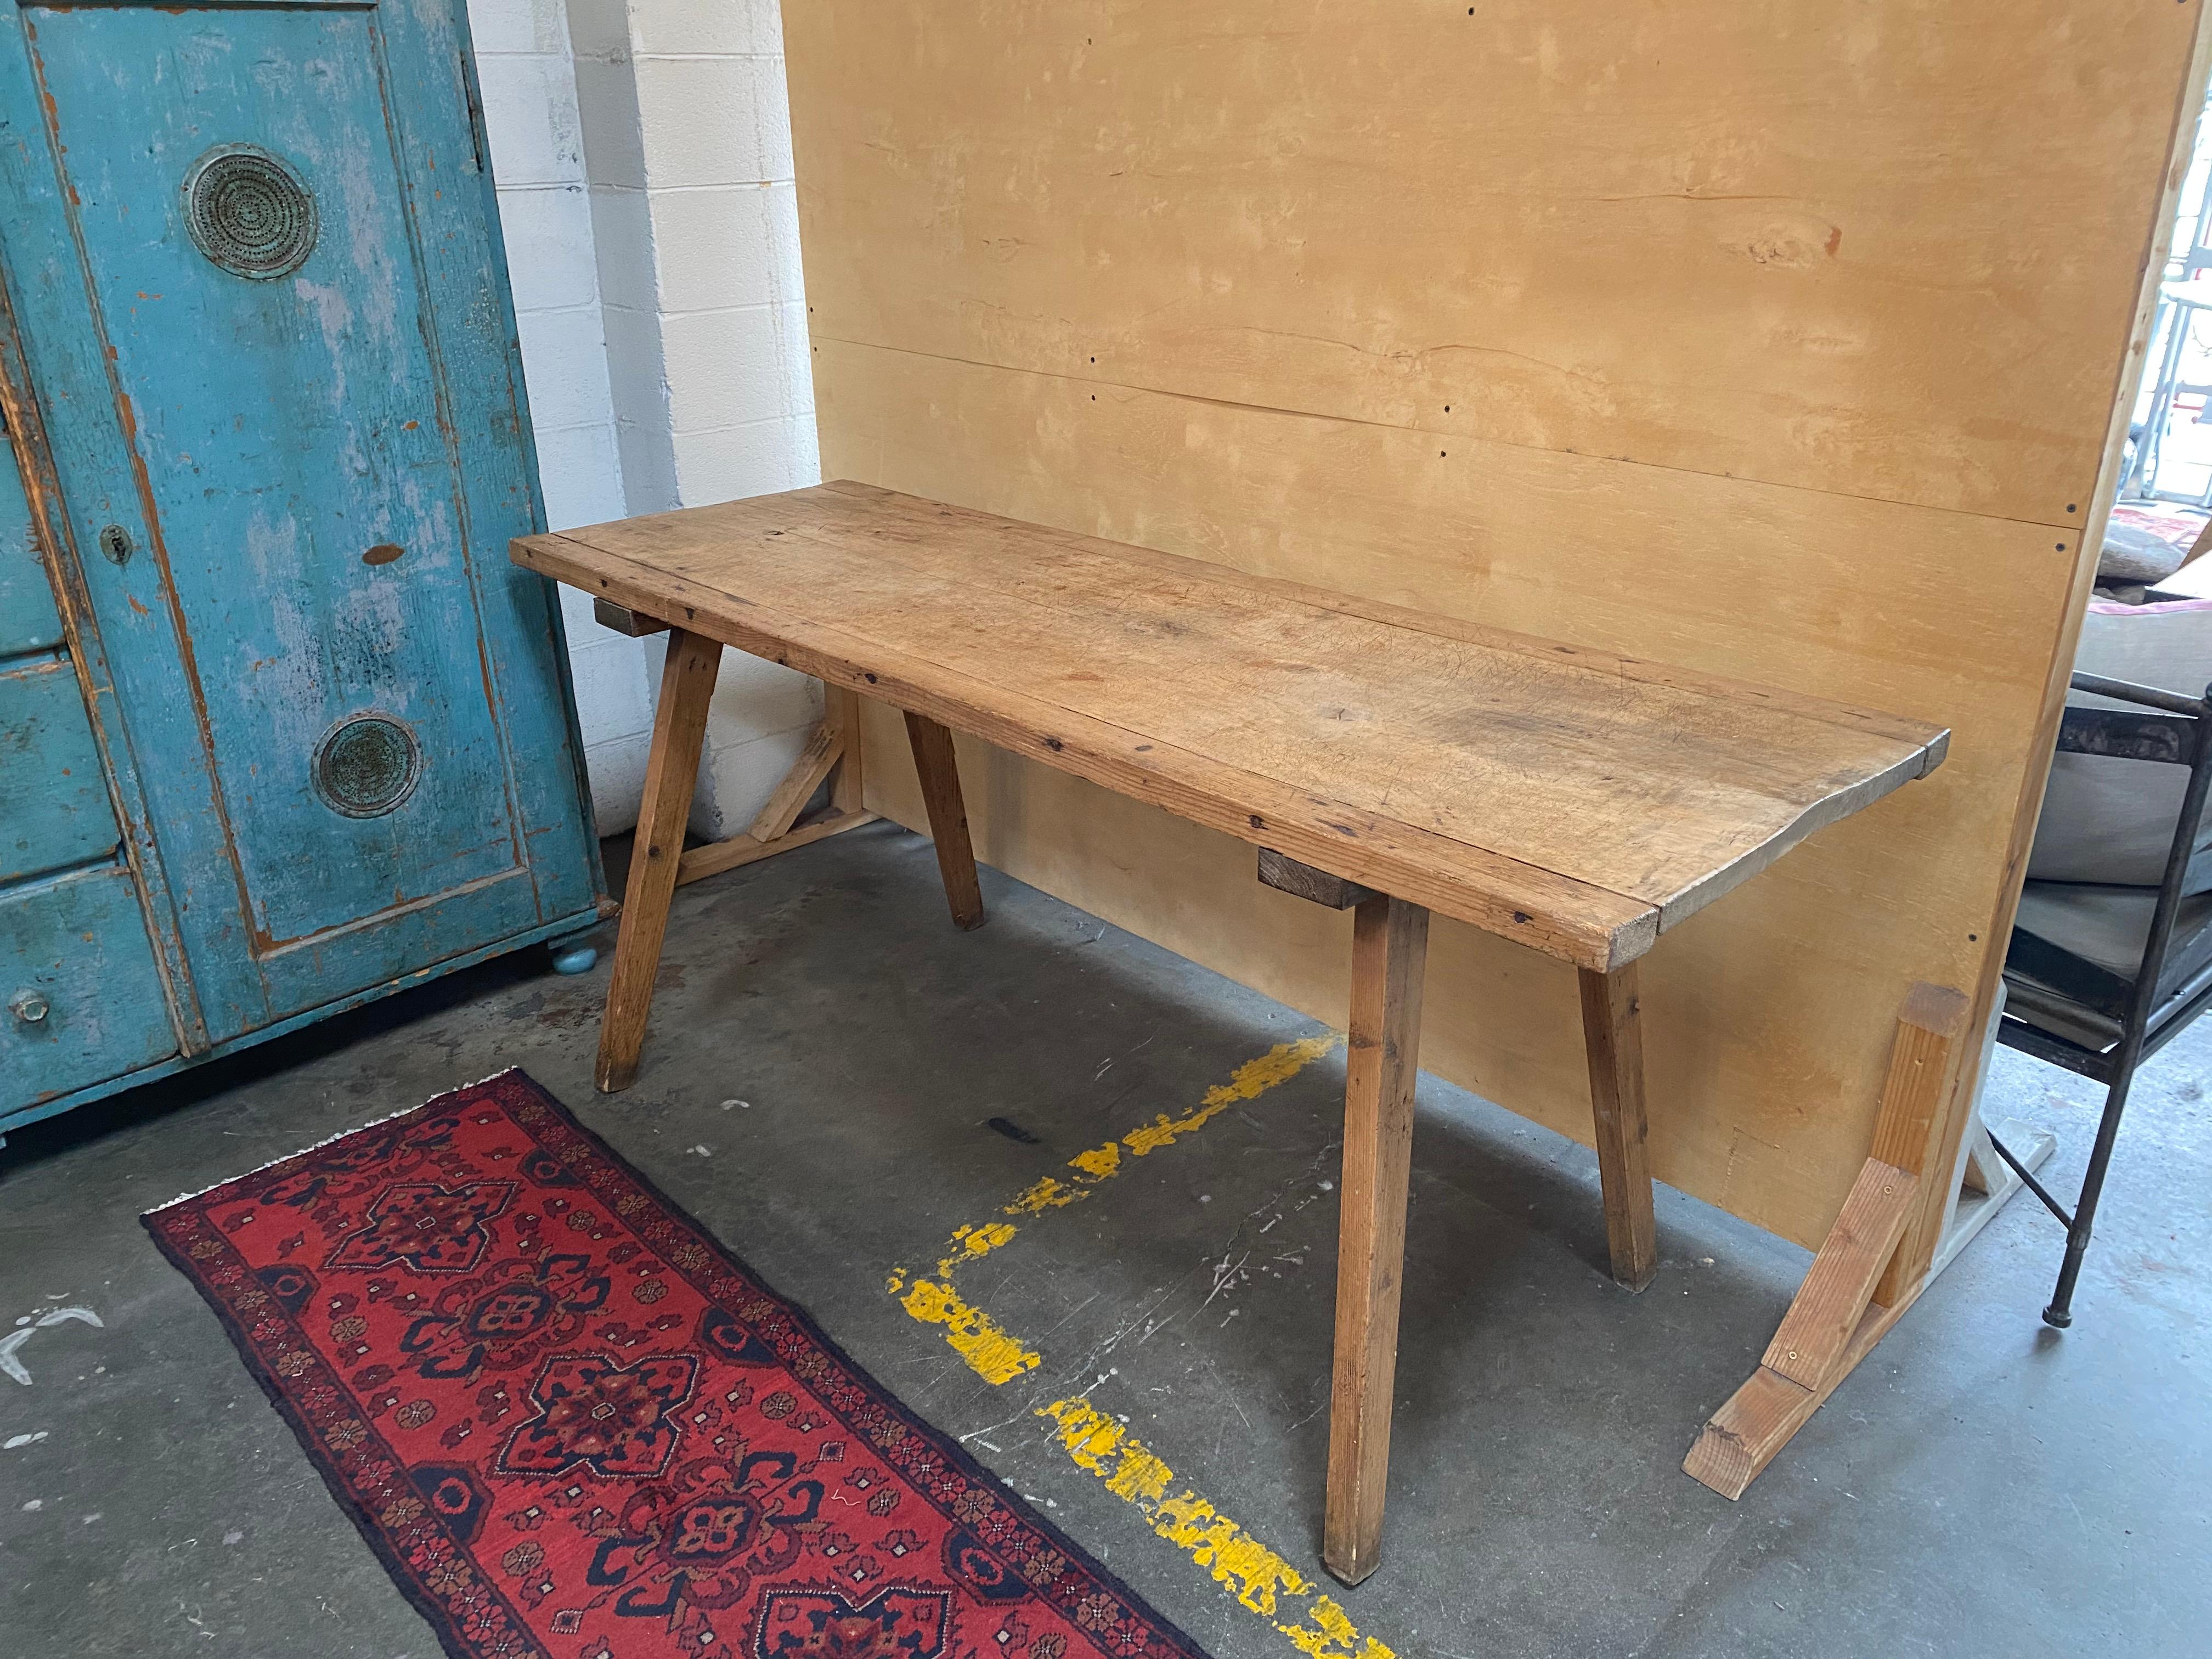 This beautifully crafted French butcher block console table is in great condition with sturdy legs and a beautiful antique finish. With a 24' depth, it would make a fantastic addition with flexible use to a multitude of rooms as either a console or